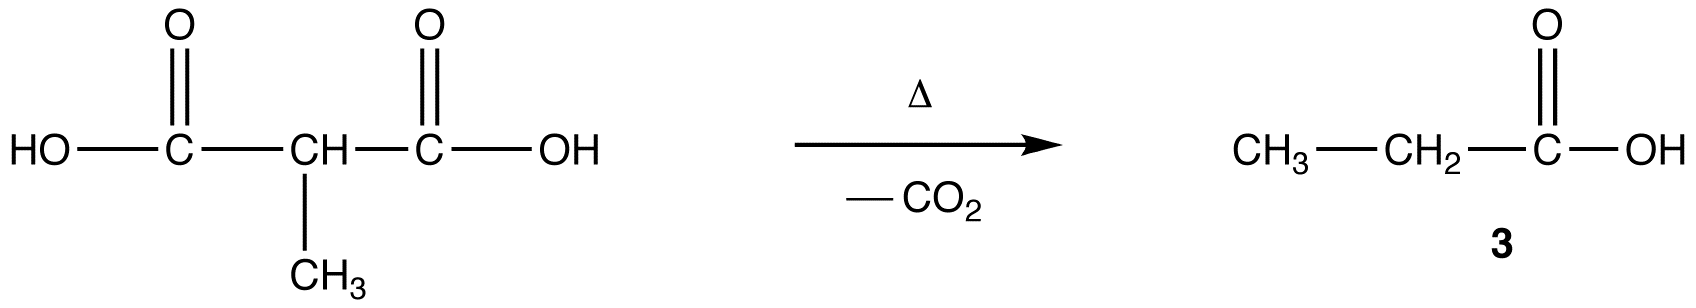 malonicestersynthesis7.png